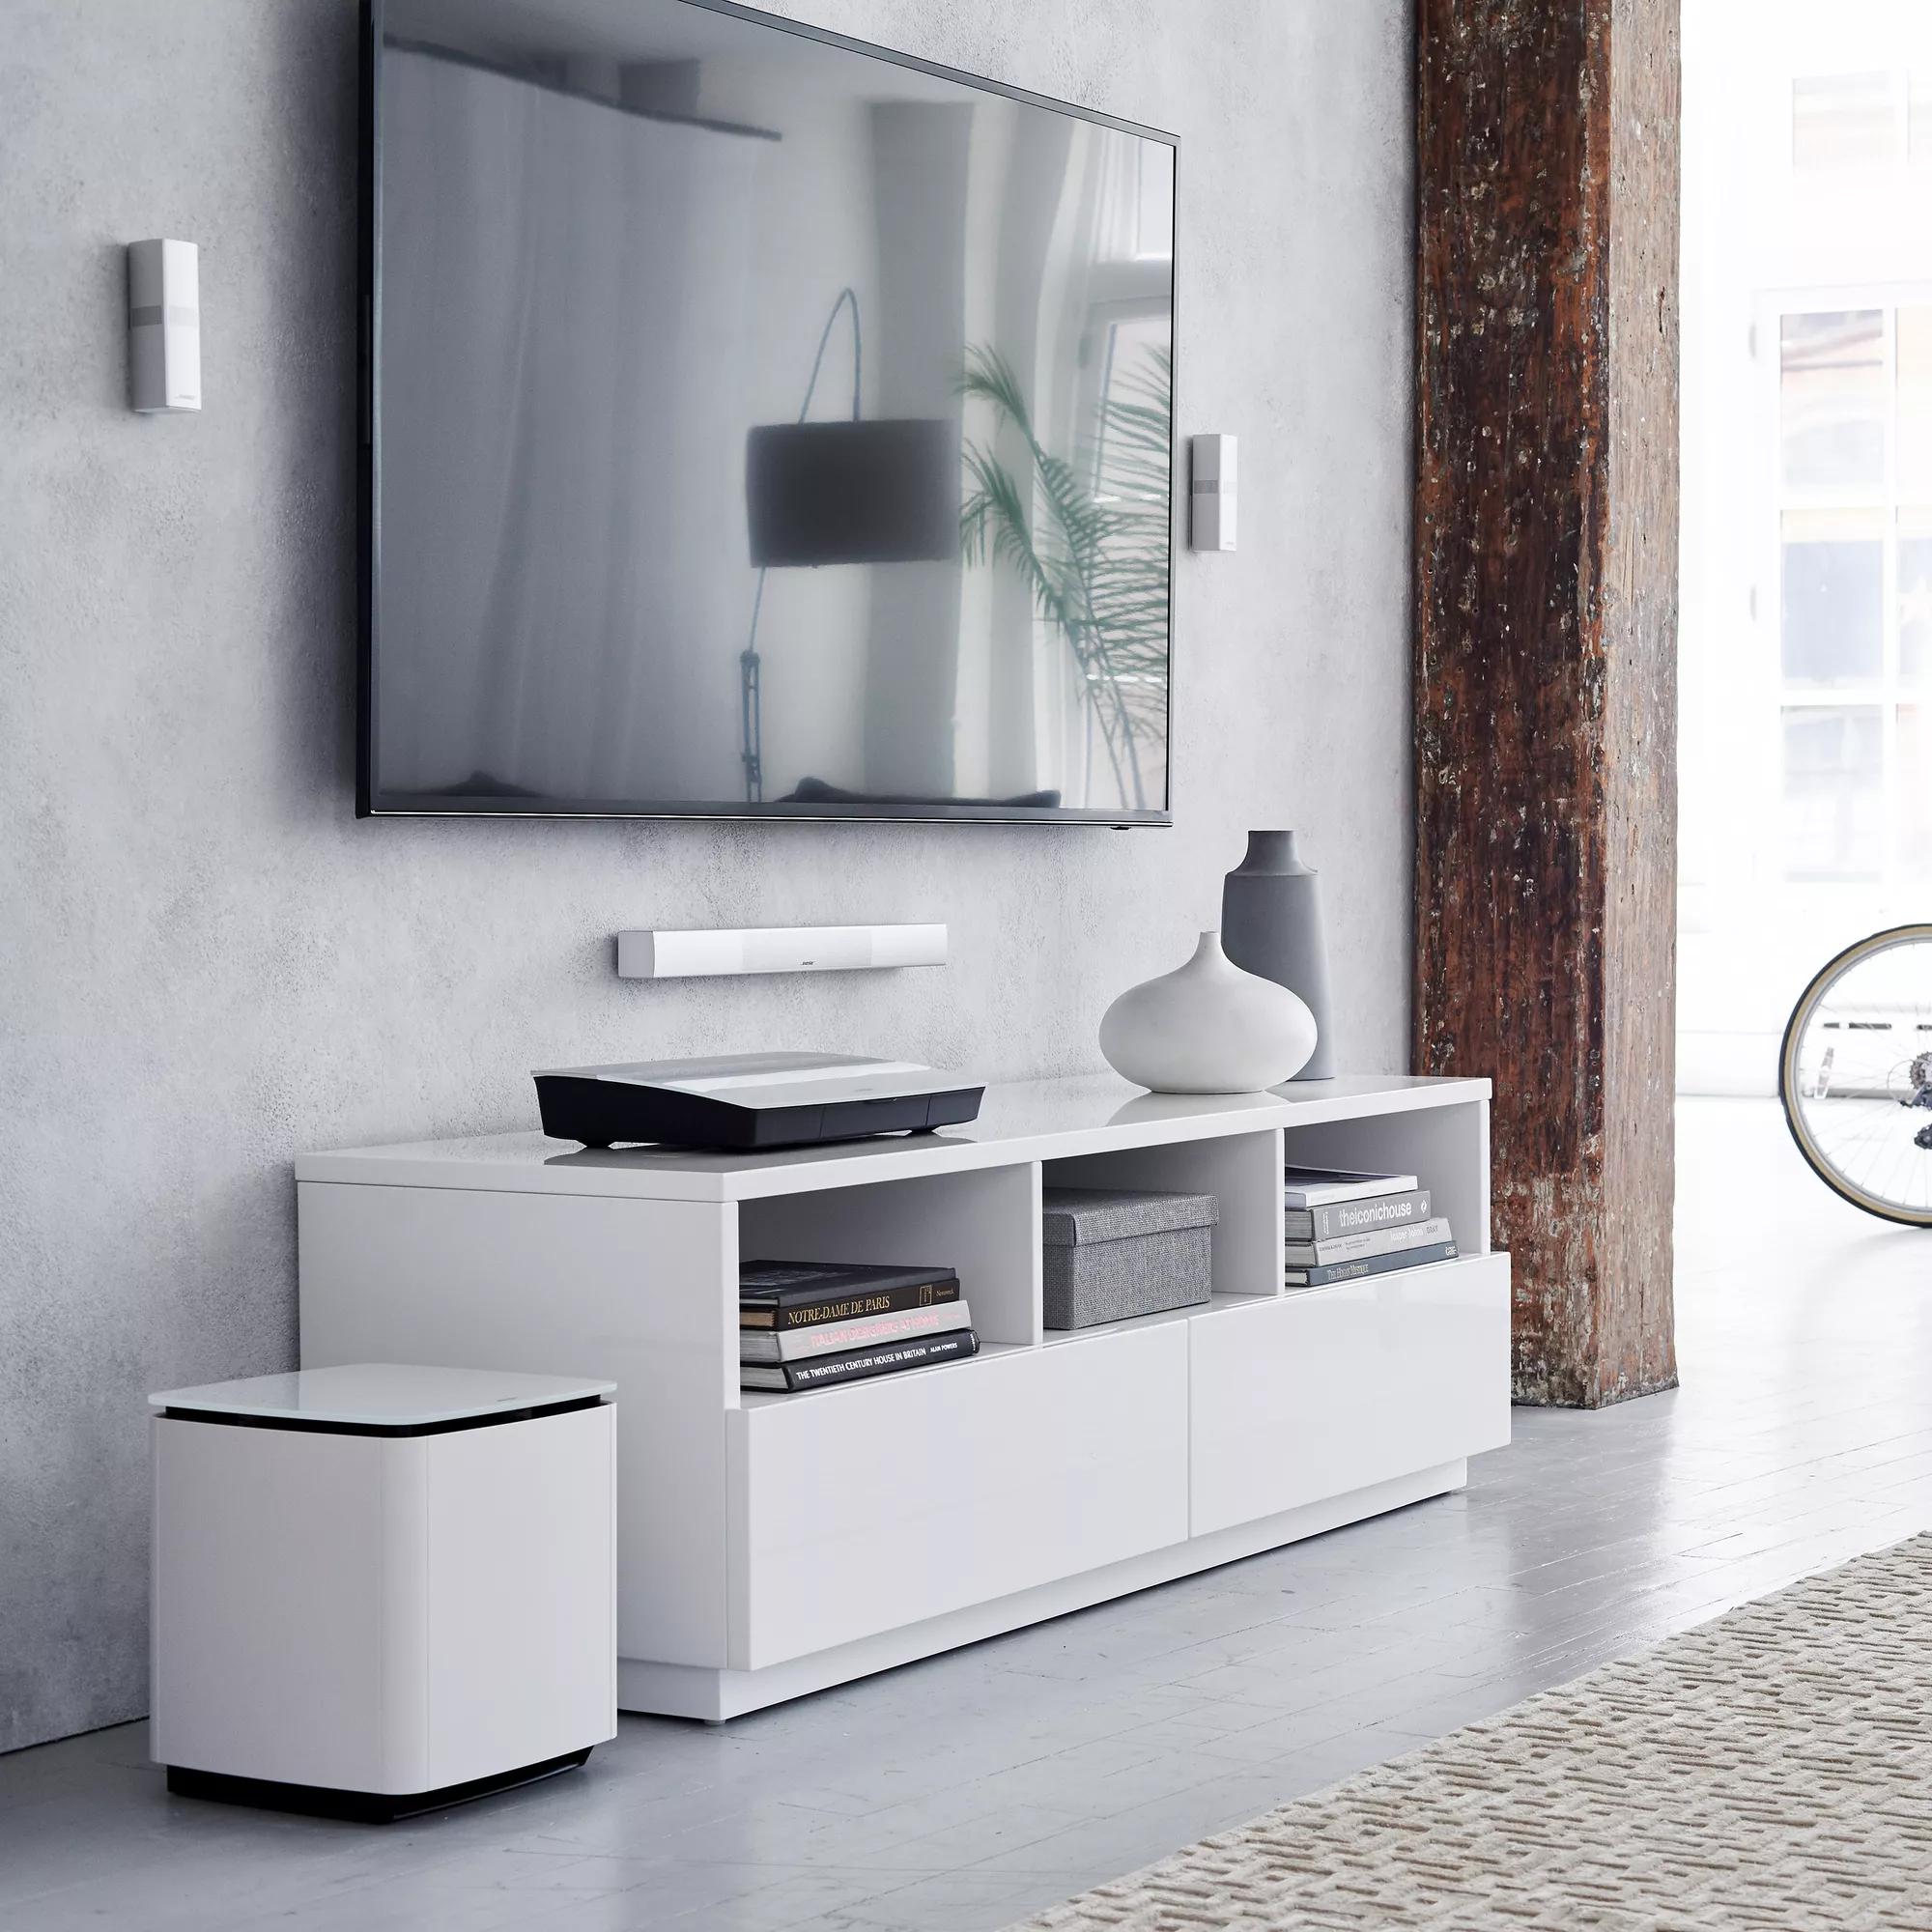 Lifestyle 650 home entertainment system